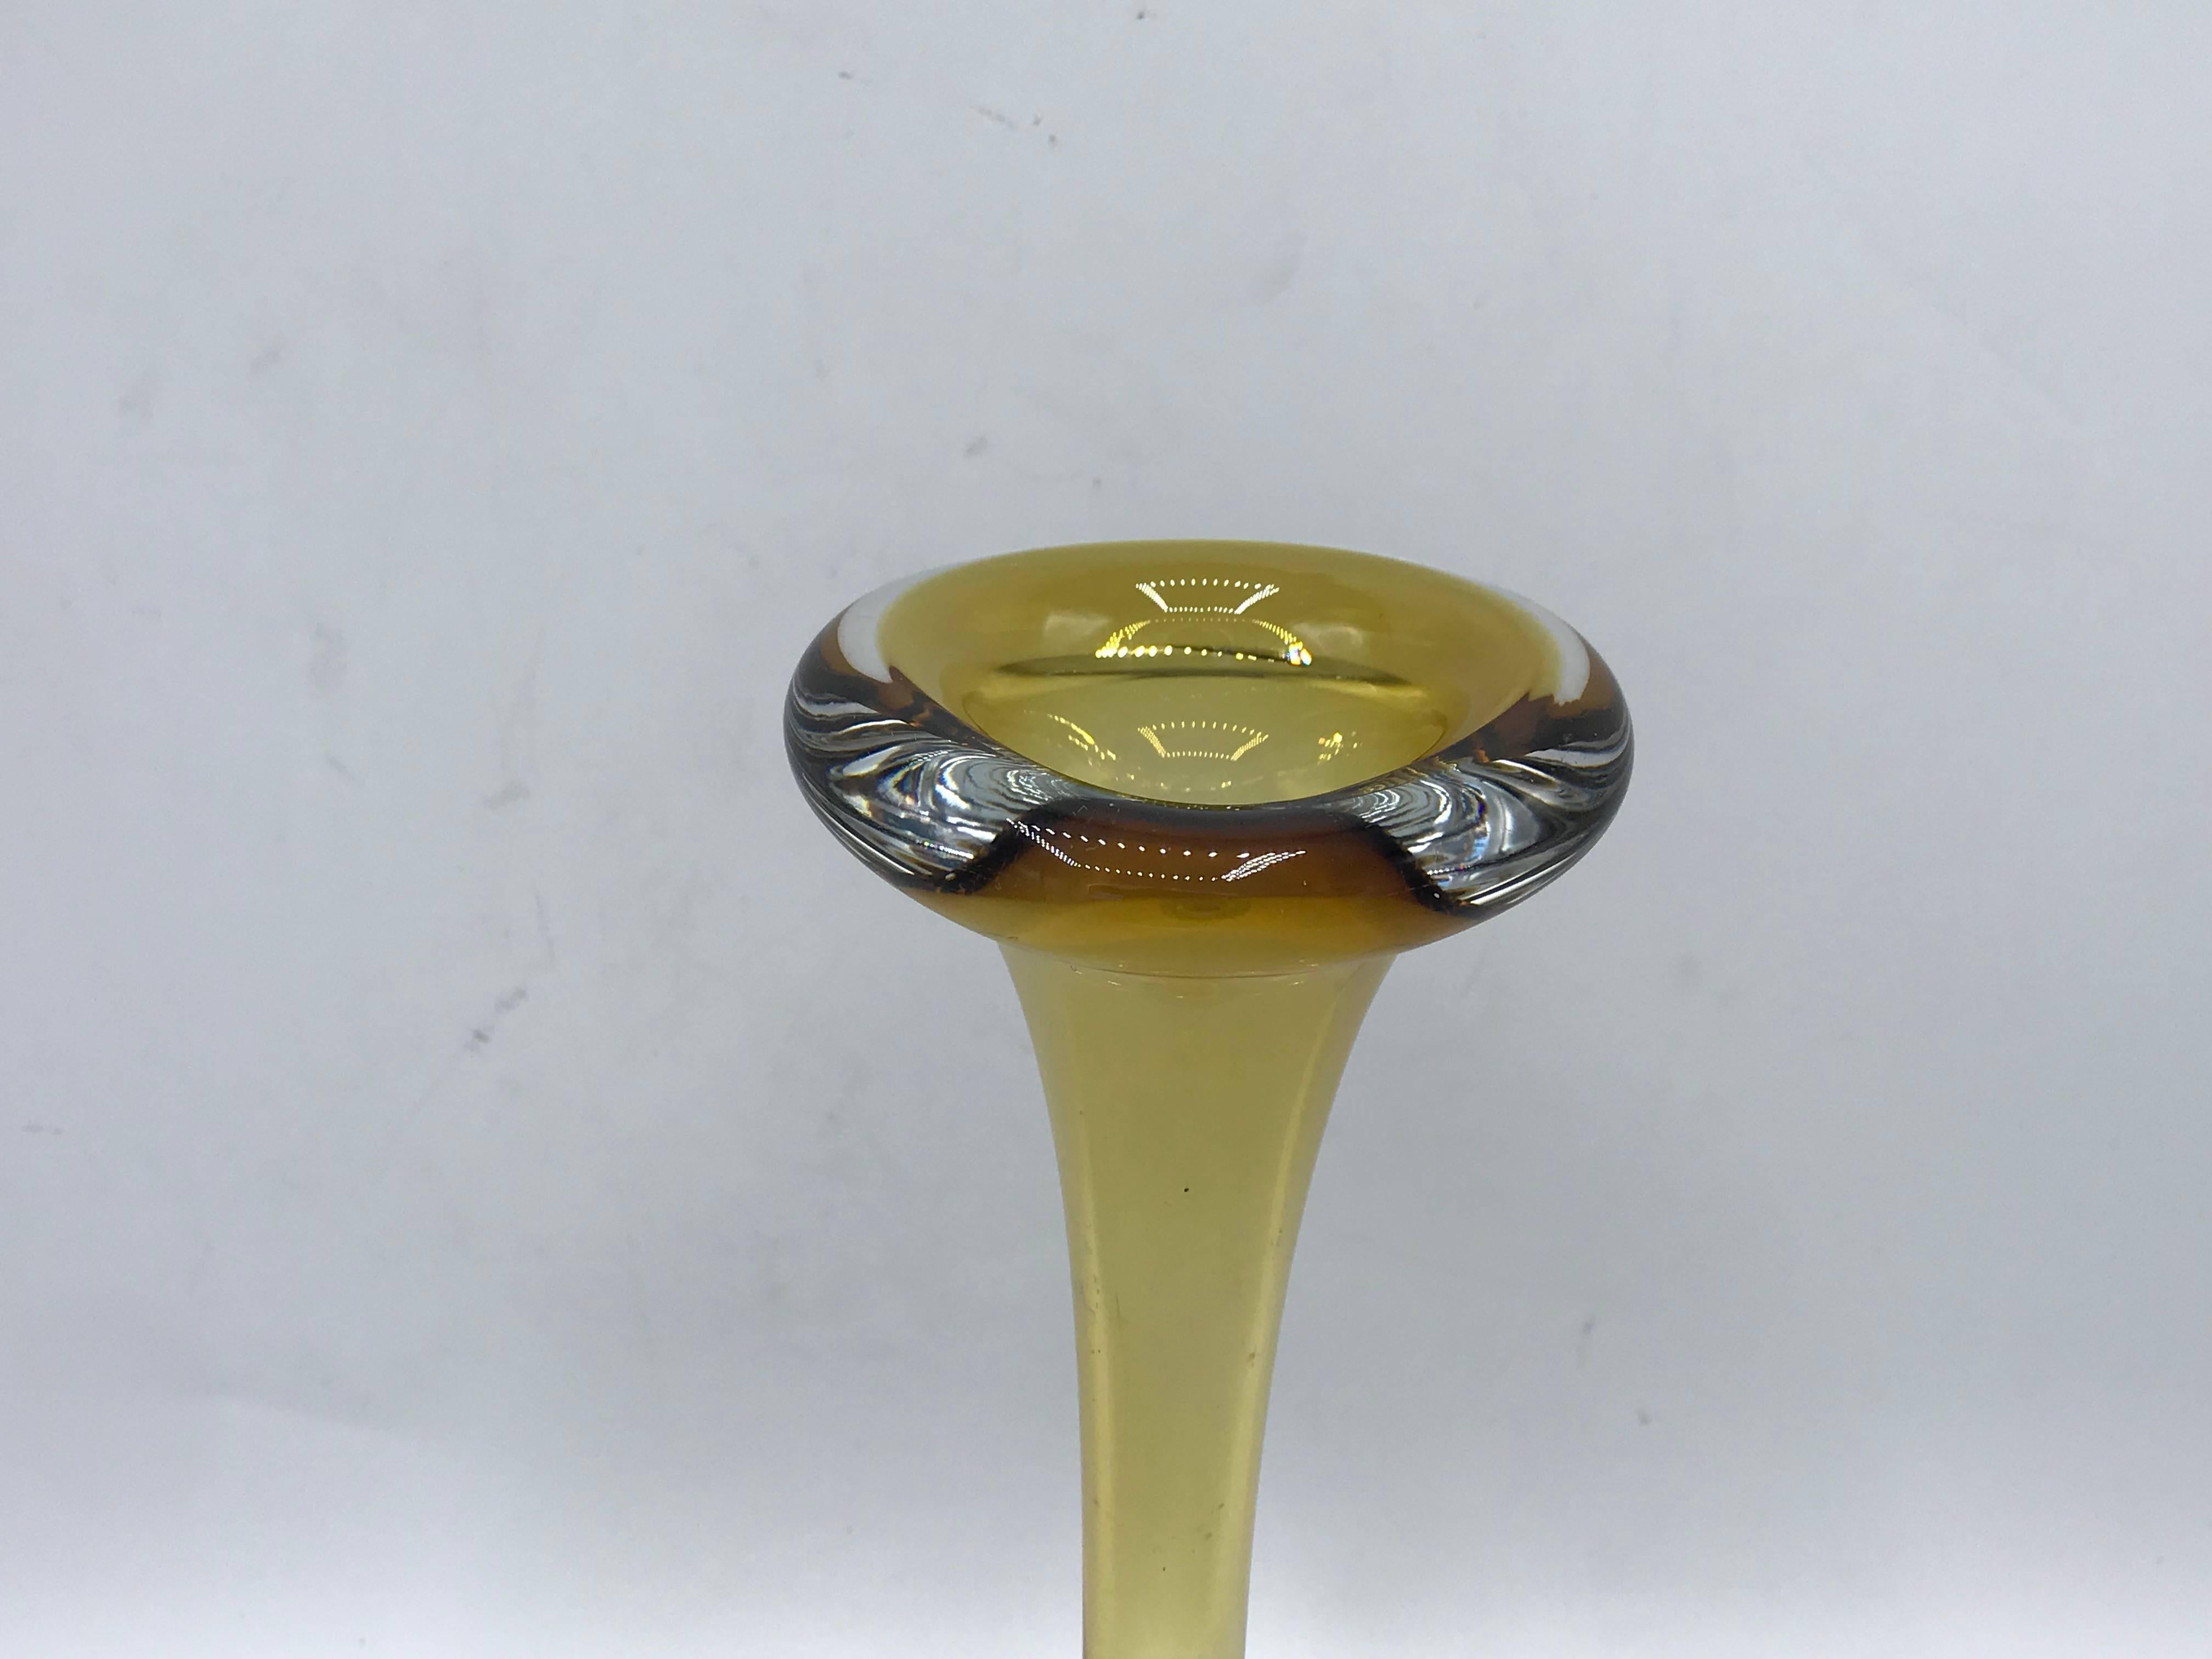 Offered is a beautiful, 1960s Italian Murano glass bud vase. The piece has a gold, yellow, and muted-orange coloring.